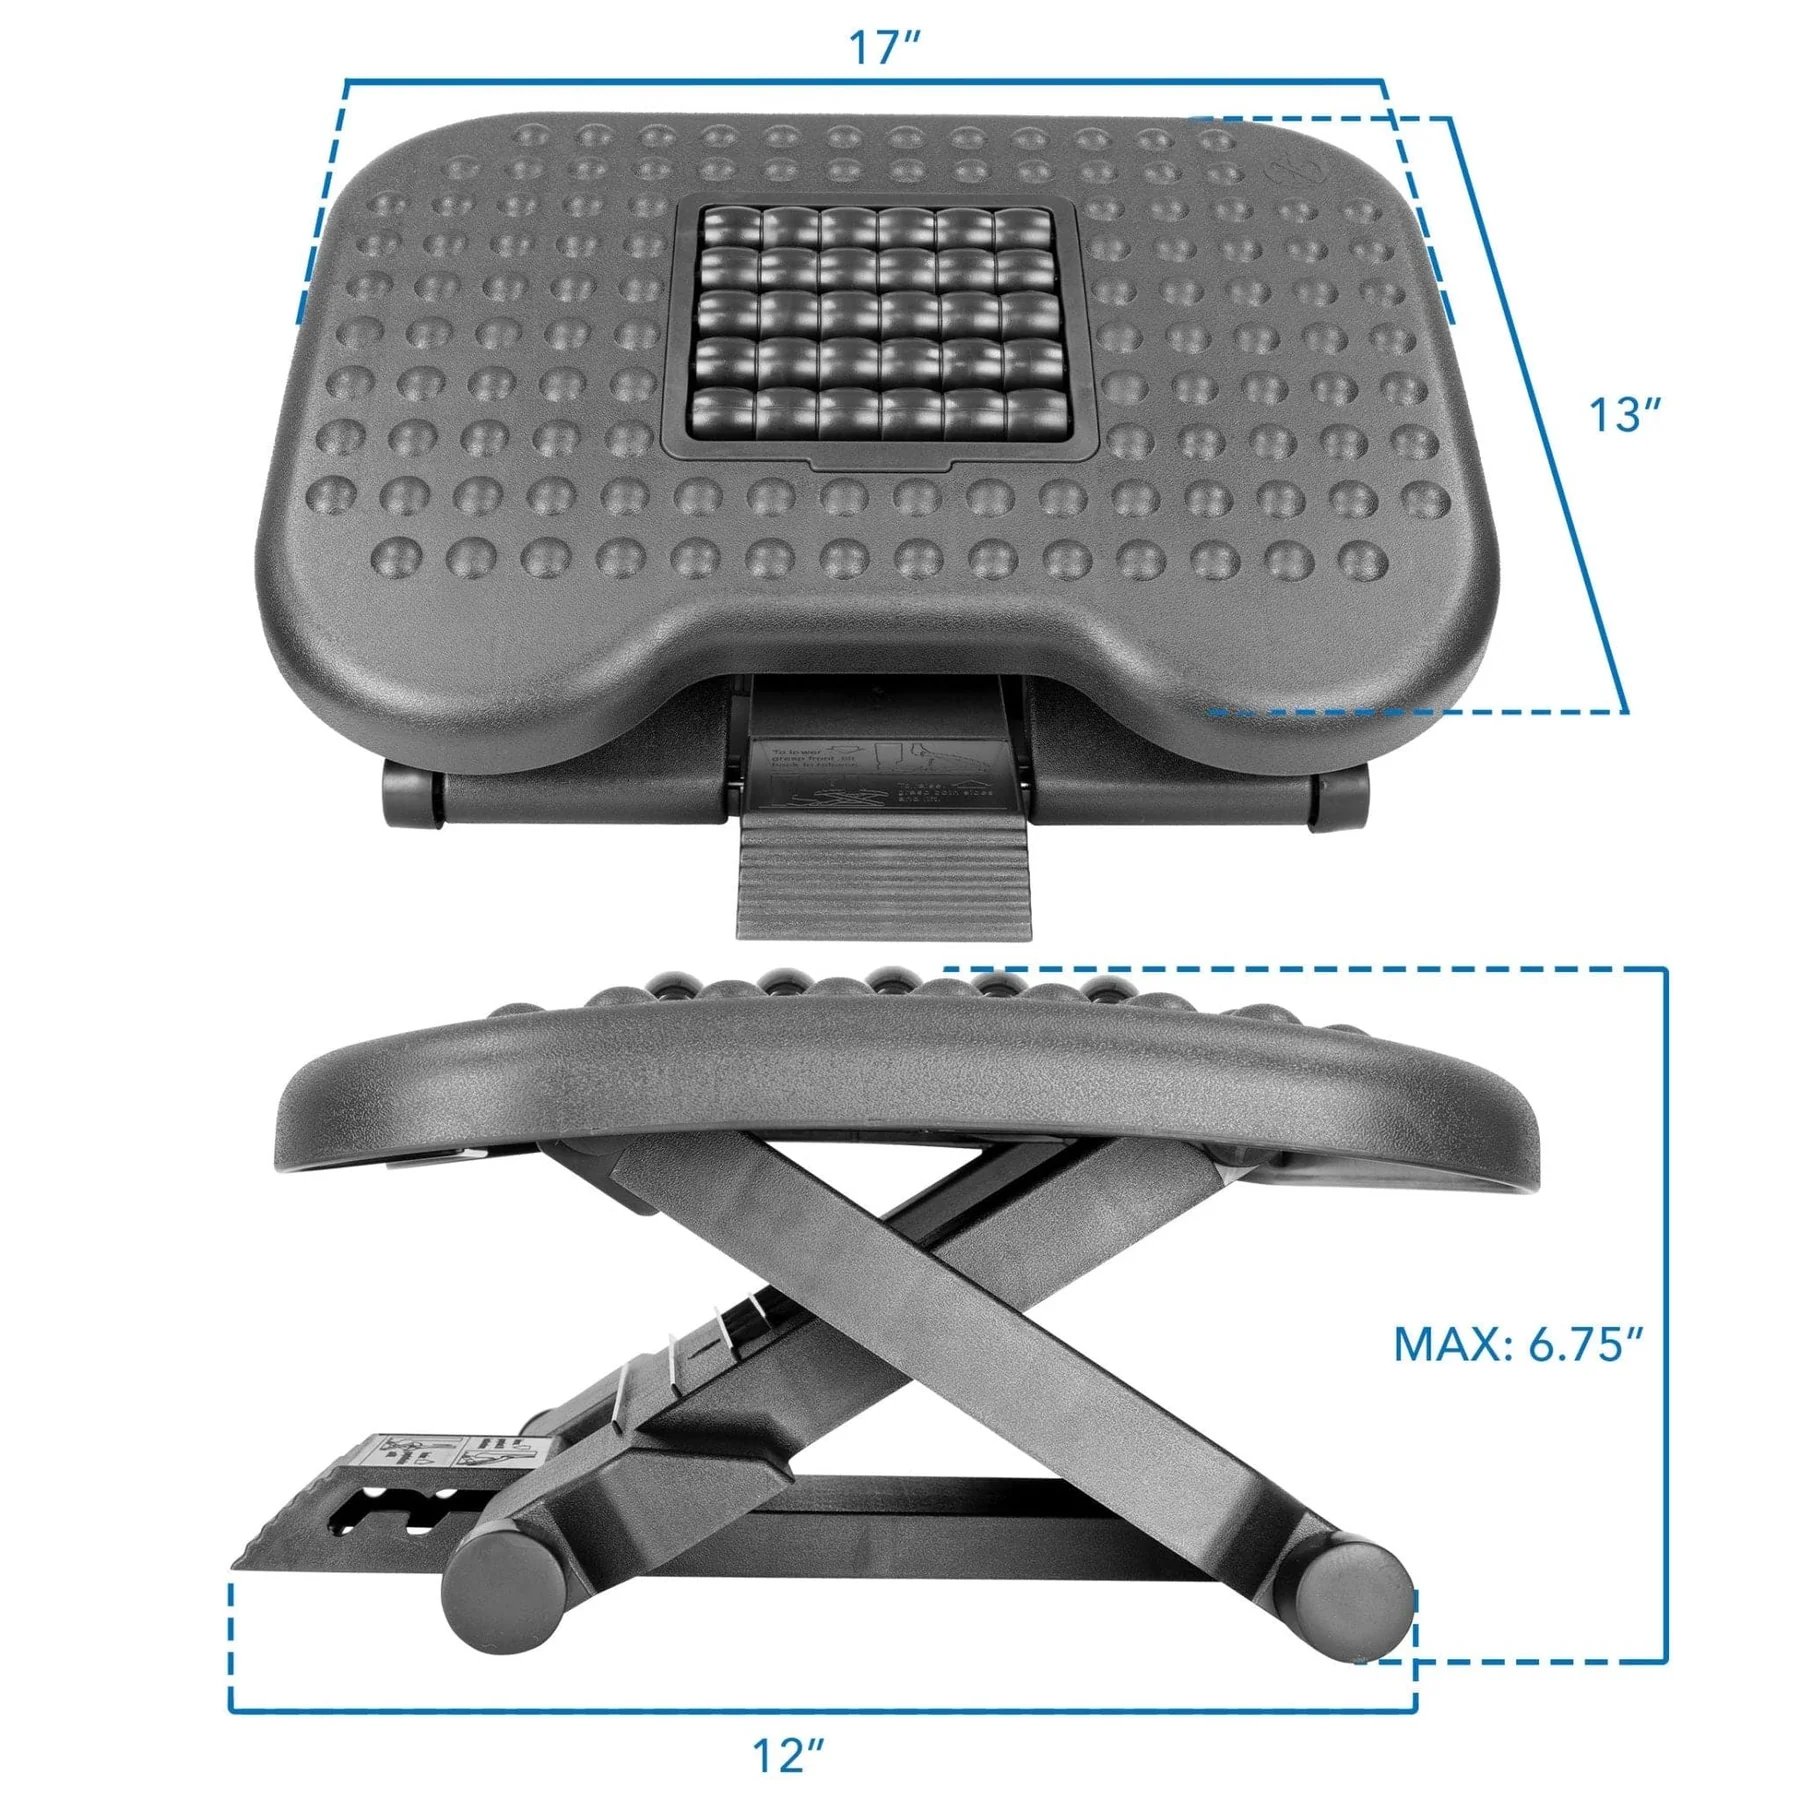 Mount IT! MI-7809 Height Adjustable and Rolling Massaging Footrest